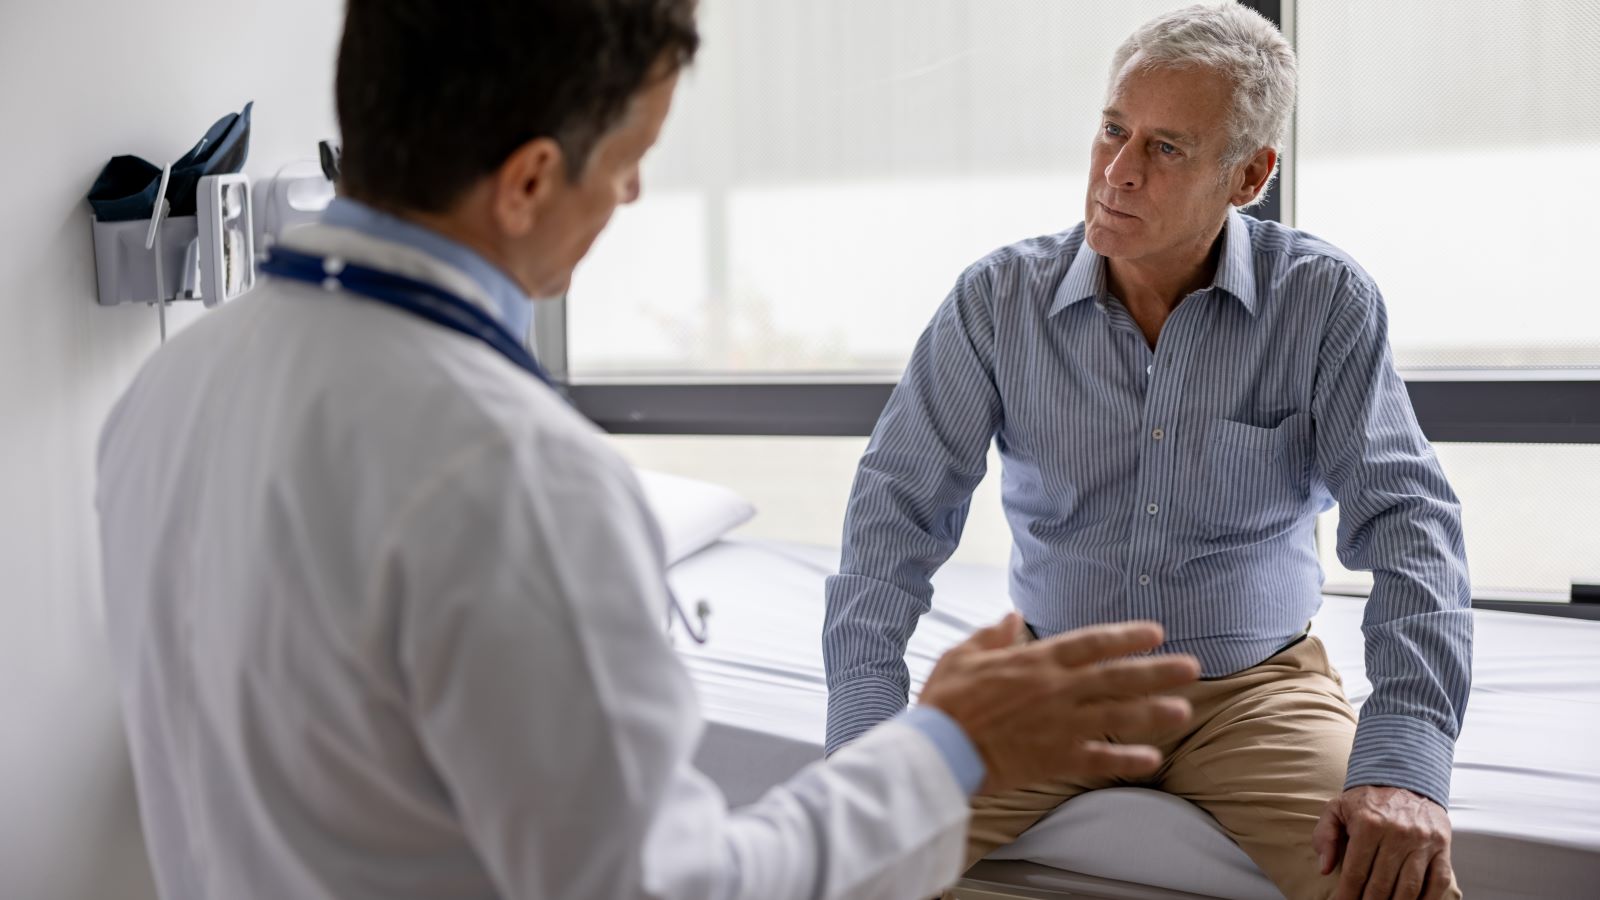 Wondering if there are any signs of testicular cancer that you should know? We asked an oncologist to weigh in.